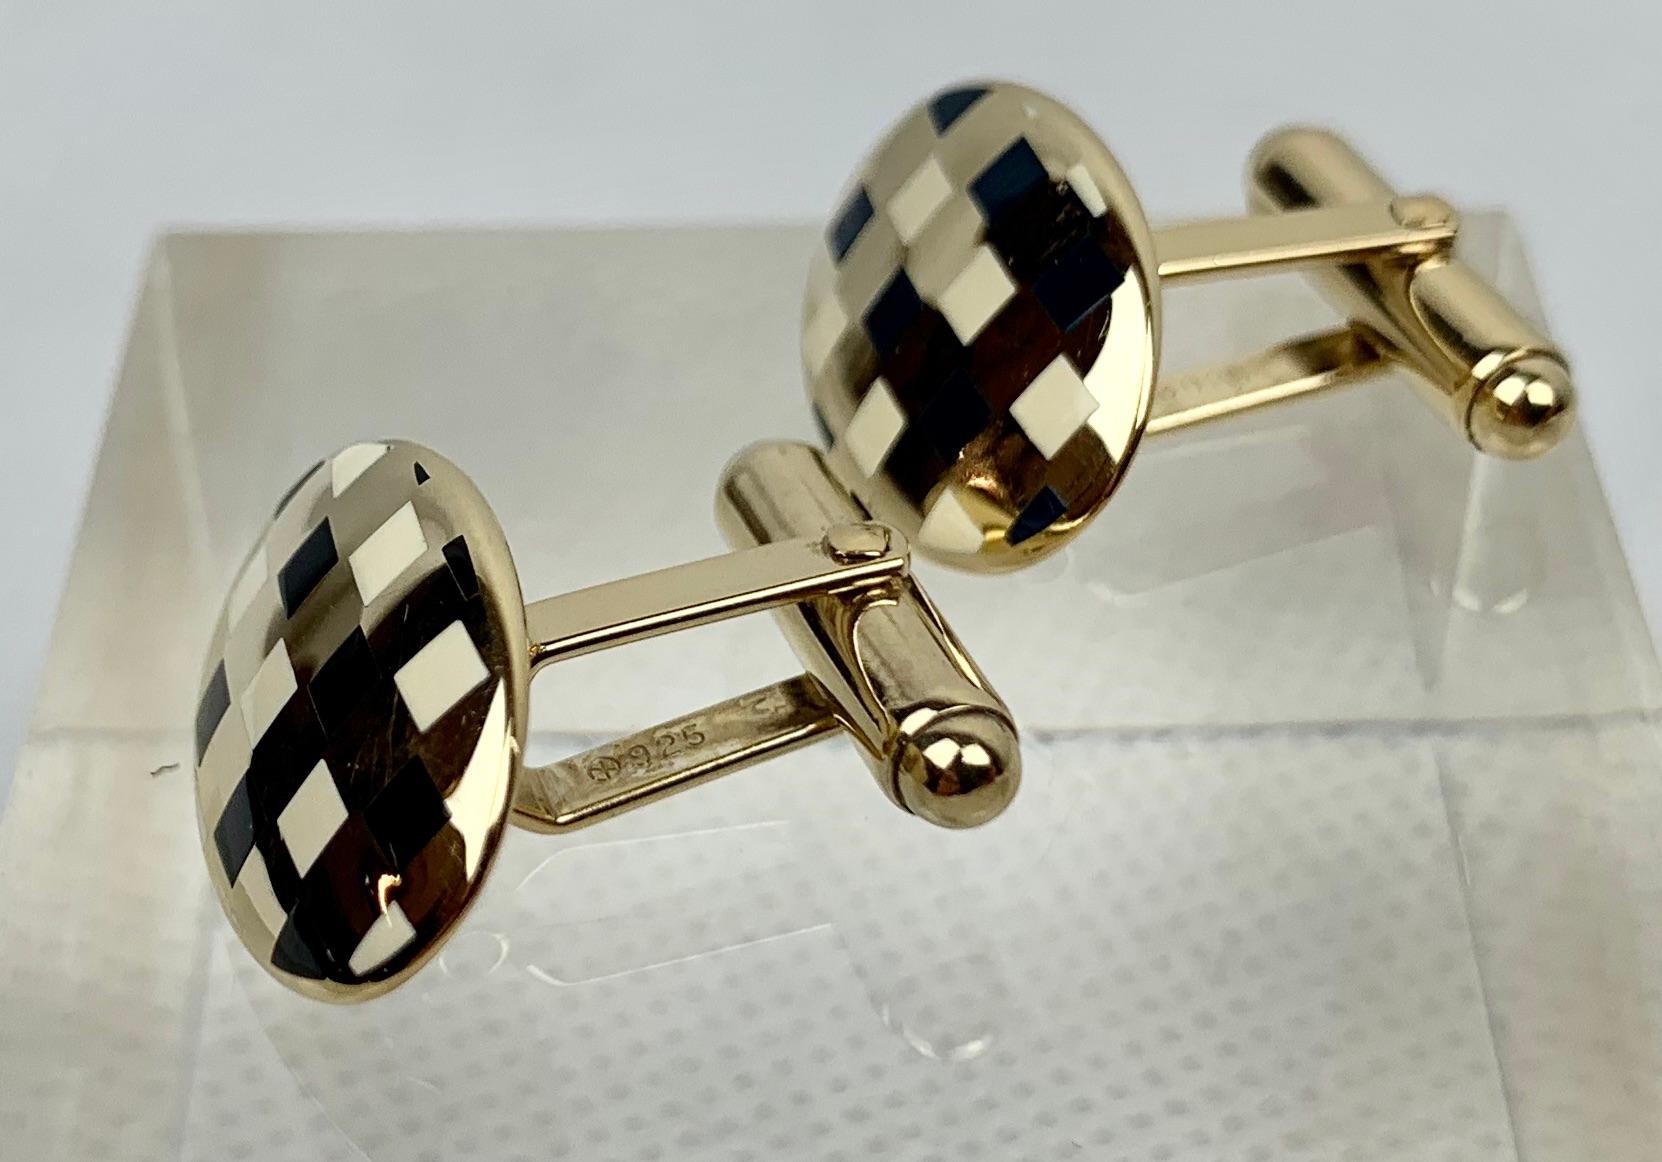 

A pair of vermeil (gold over sterling silver) oval cufflinks with squares of high fired black and white enamel.  They are marked sterling and .925 on the posts.  The posts are hinged so they can move with your shirt as your wrist bends.  Better